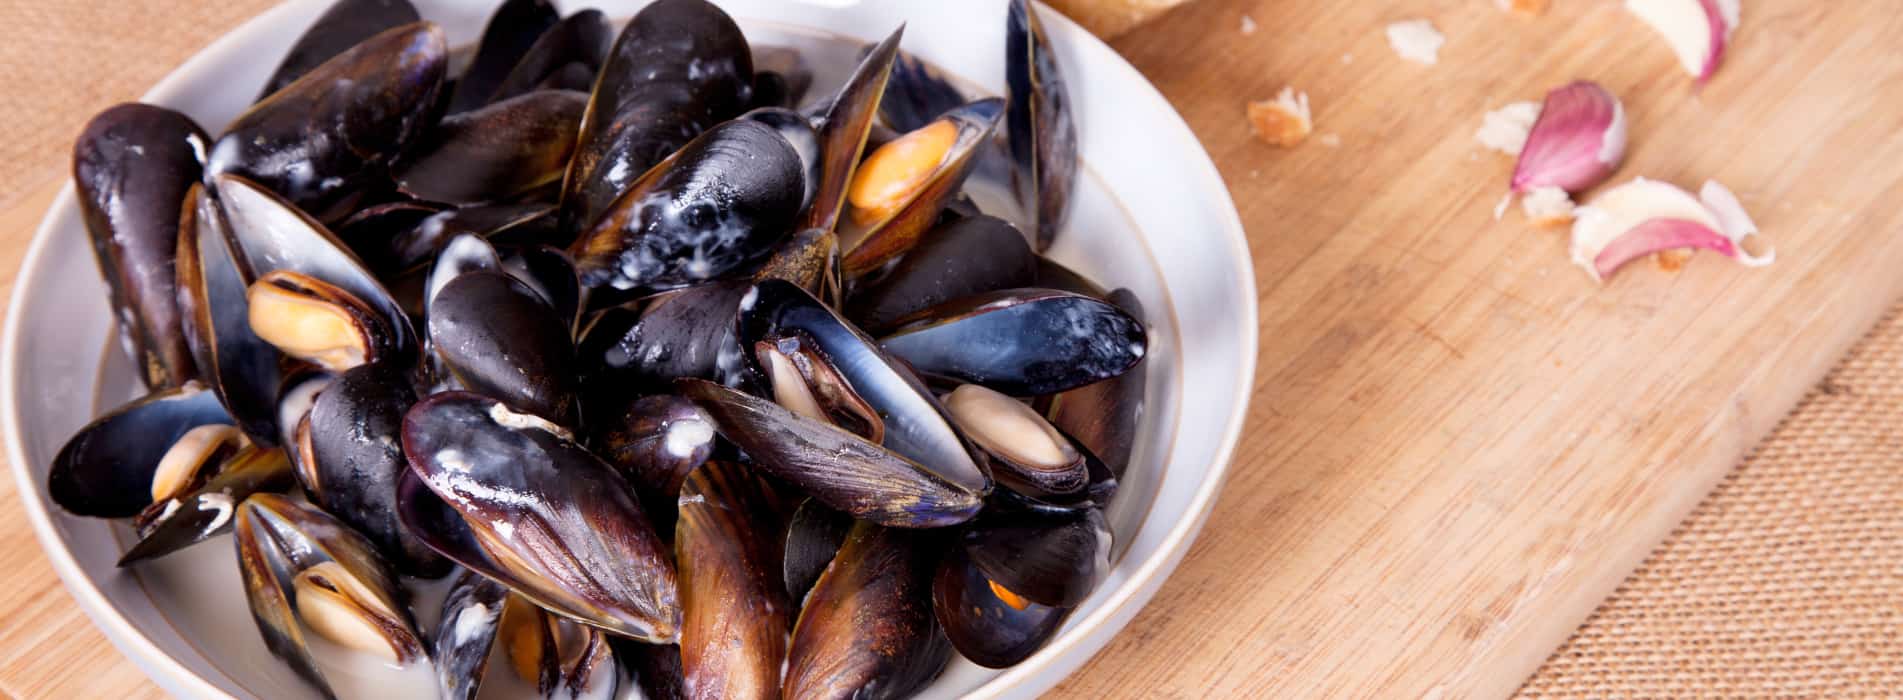 Mussels and weight loss